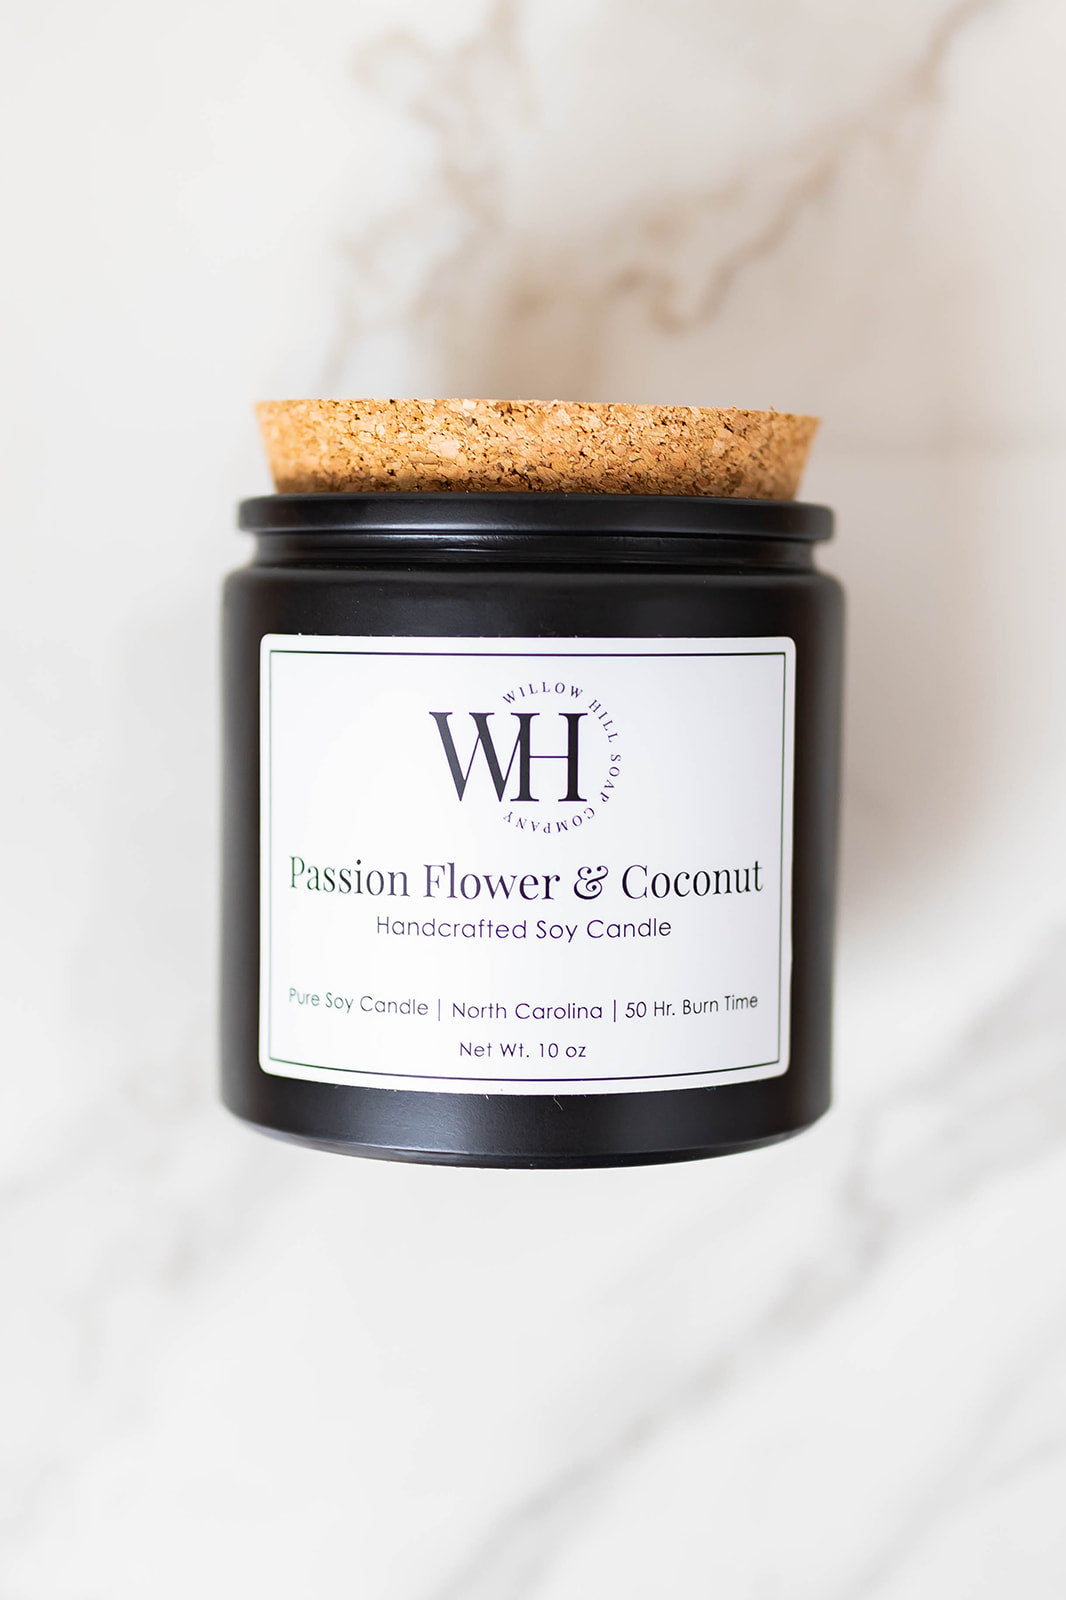 Passion Flower & Coconut Soy Candle